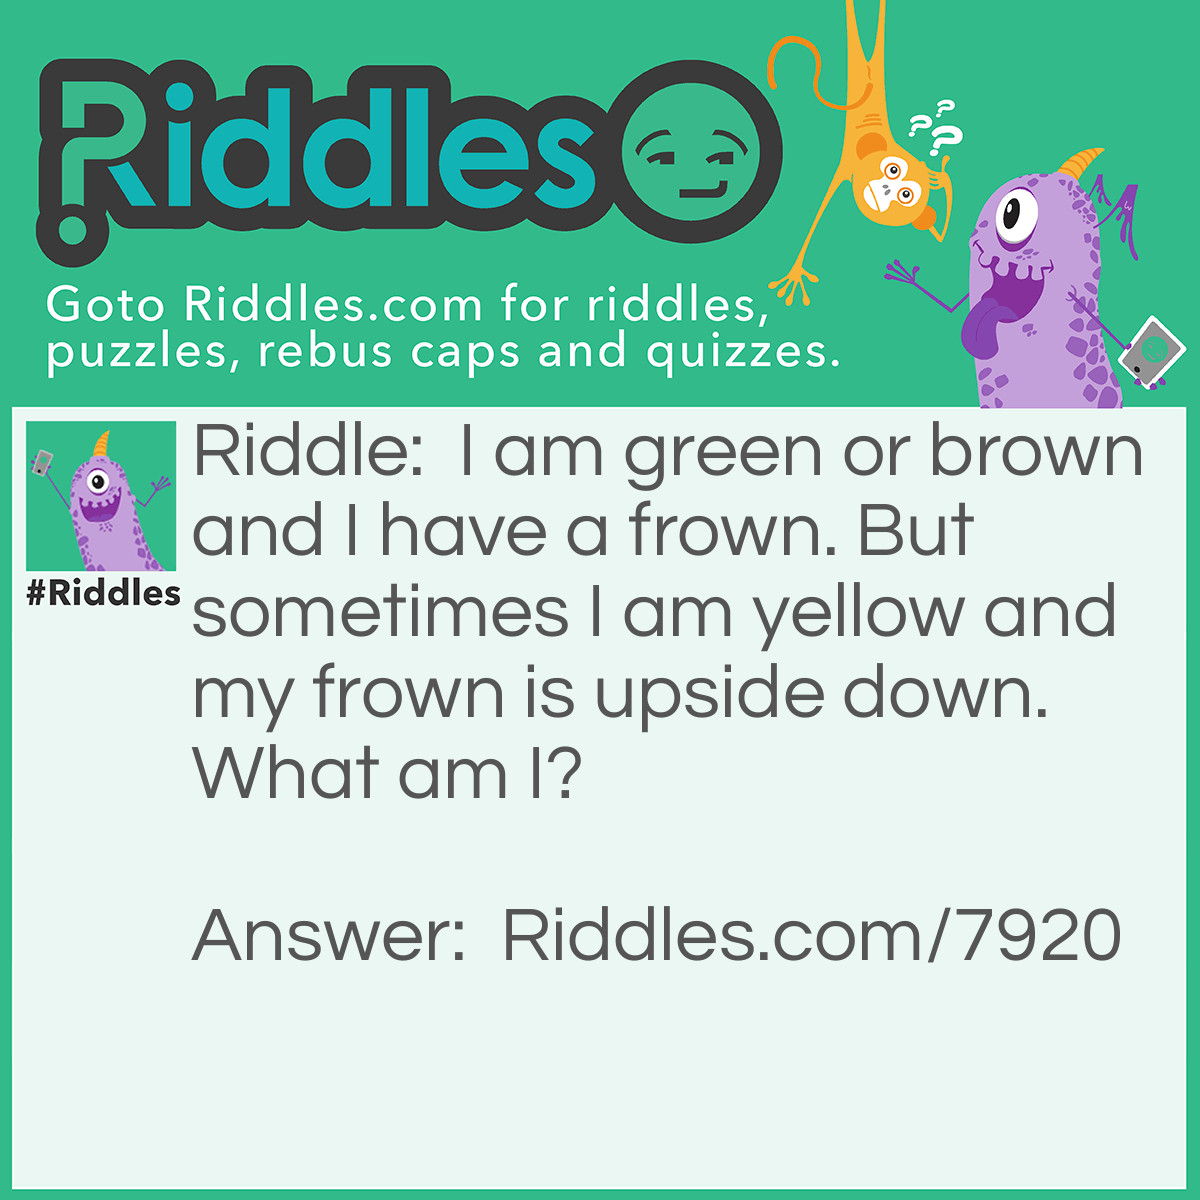 Riddle: I am green or brown and I have a frown. But sometimes I am yellow and my frown is upside down. What am I? Answer: A banana.